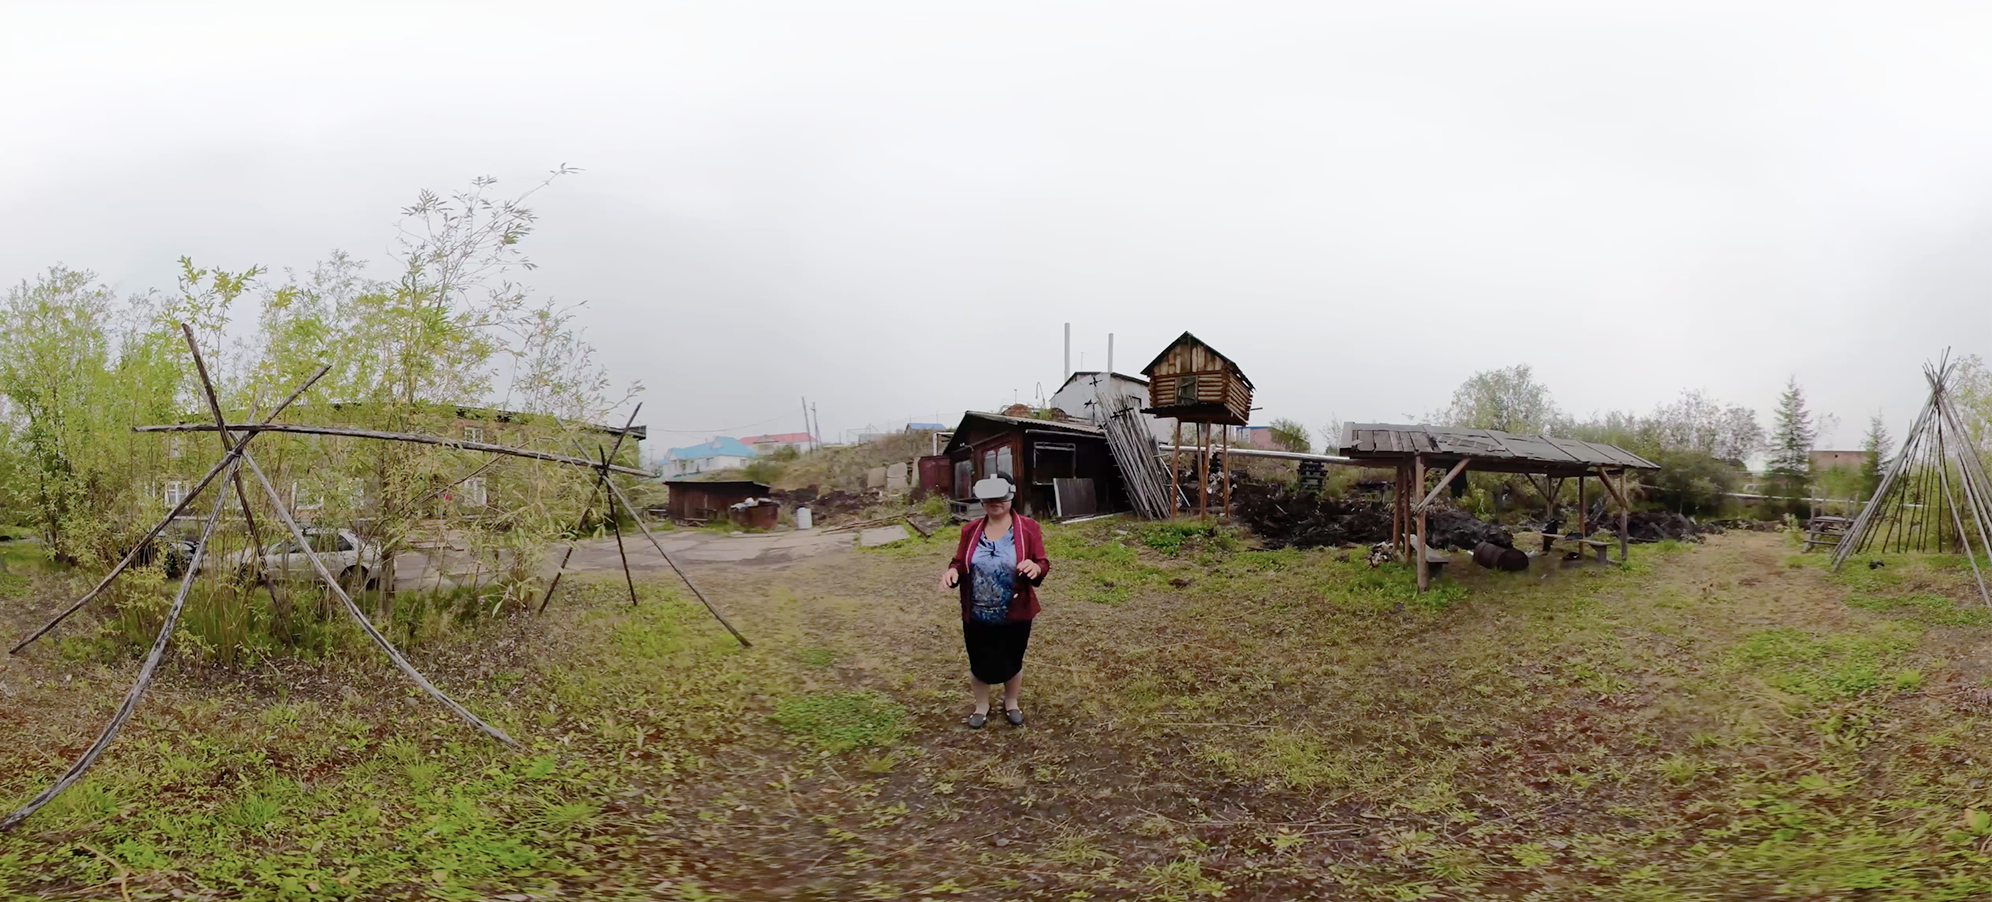 A woman wearing a VR headset stands outside in a landscape with some outbuildings.